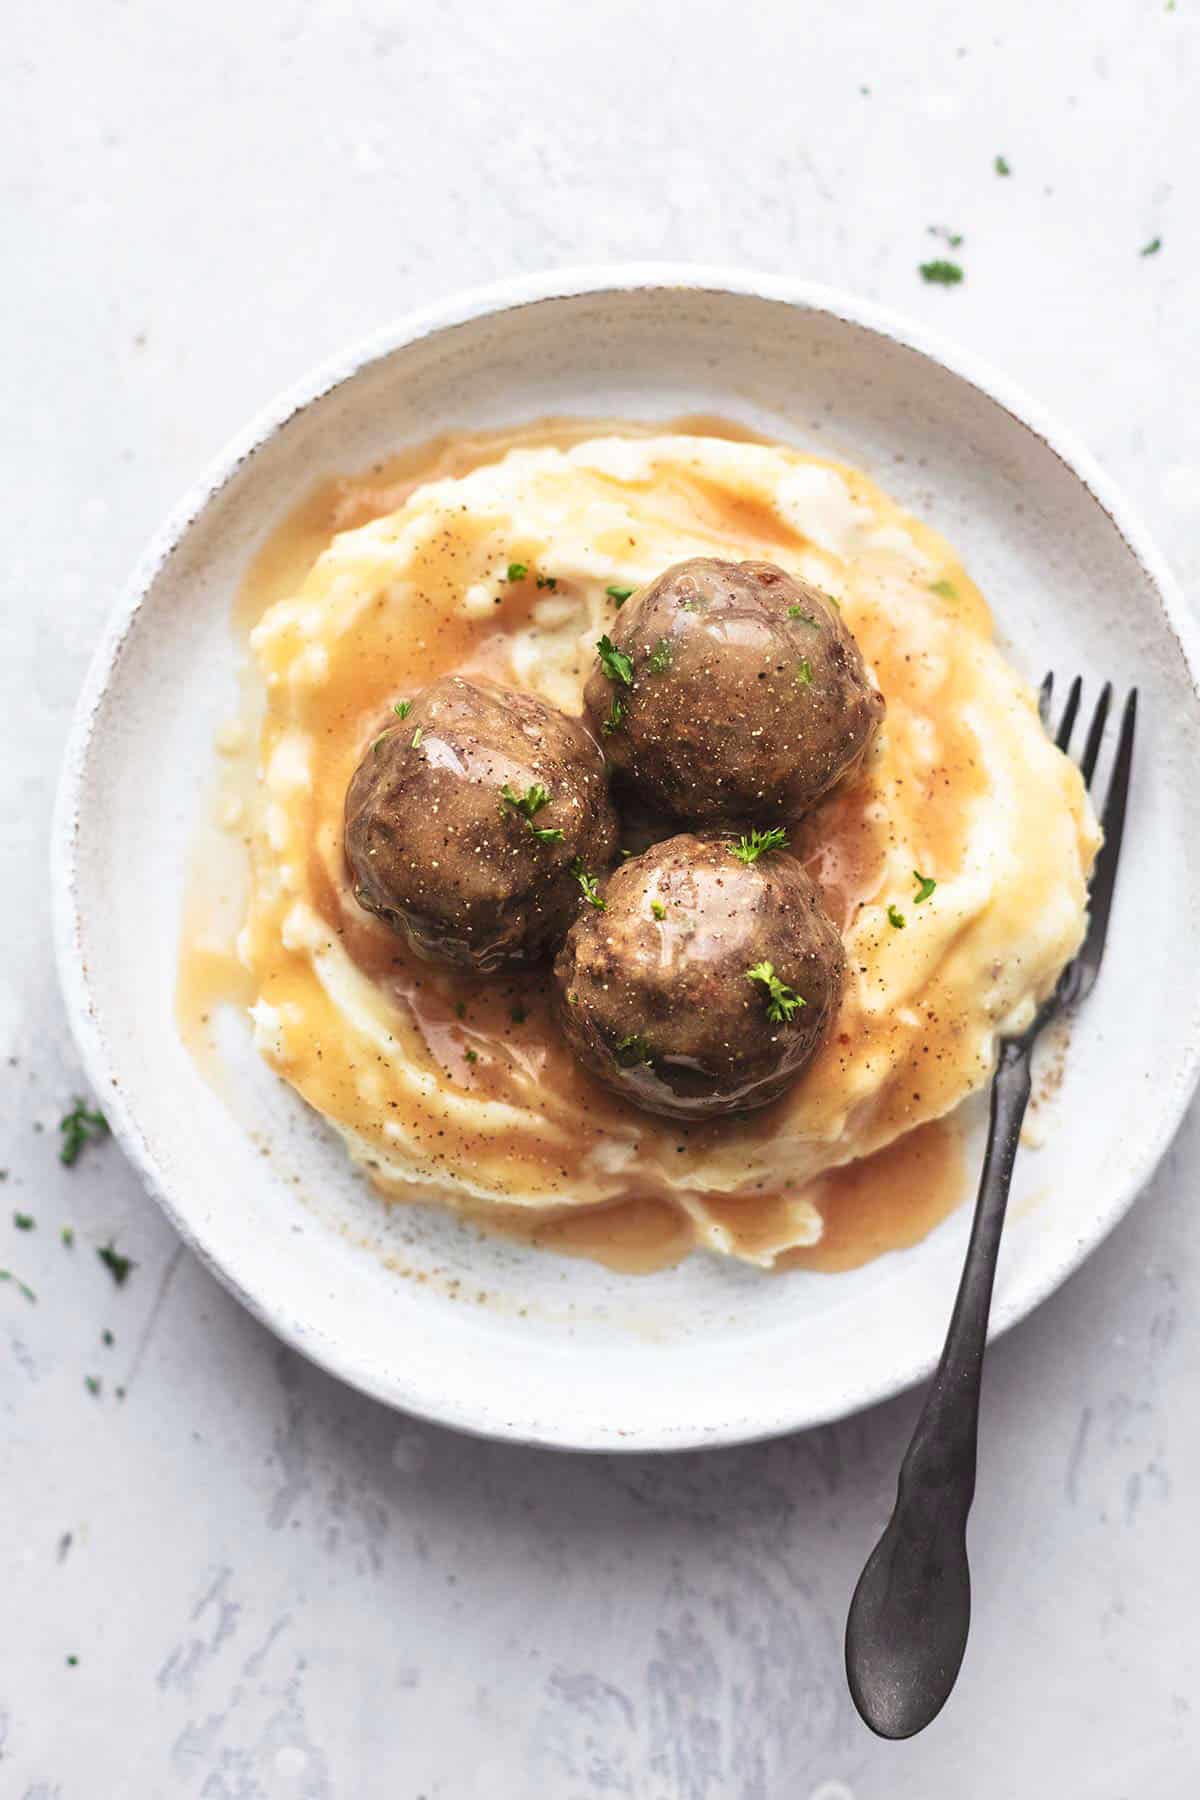 meatballs on a plate with mashed potatoes